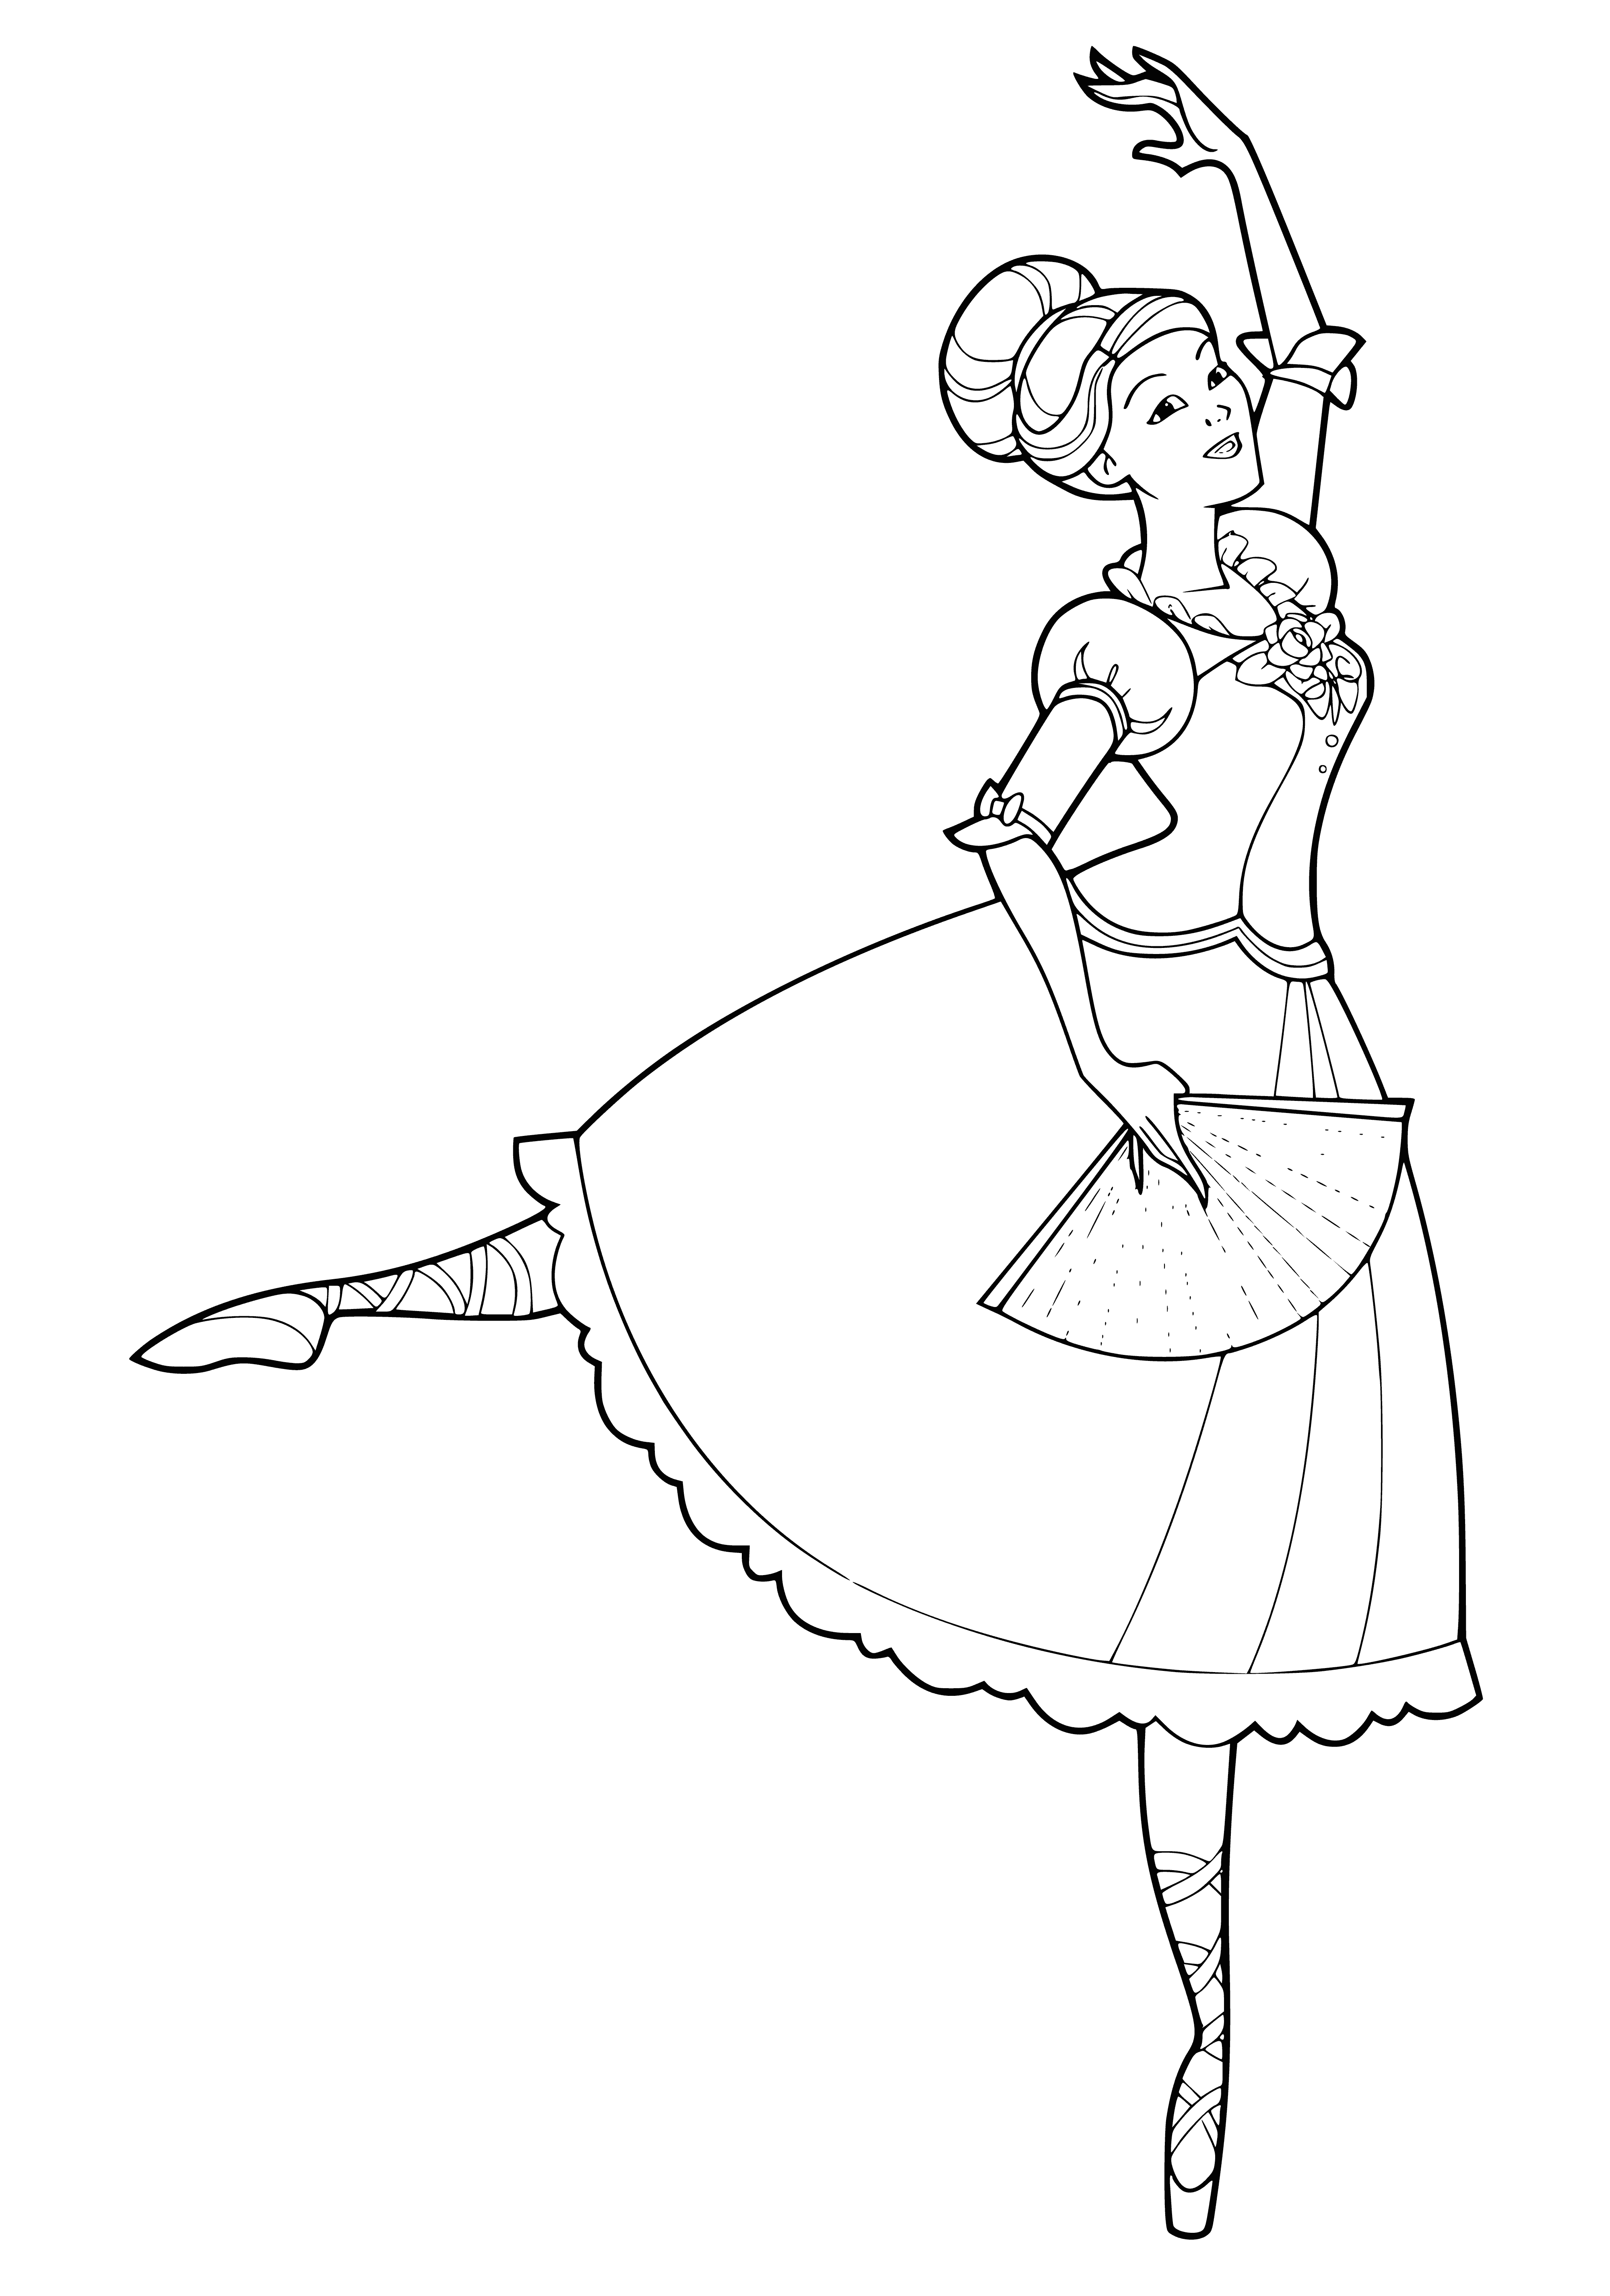 coloring page: - 
Ballerina stands gracefully on one leg, fan in front of face, in white tutu and ballet slippers.